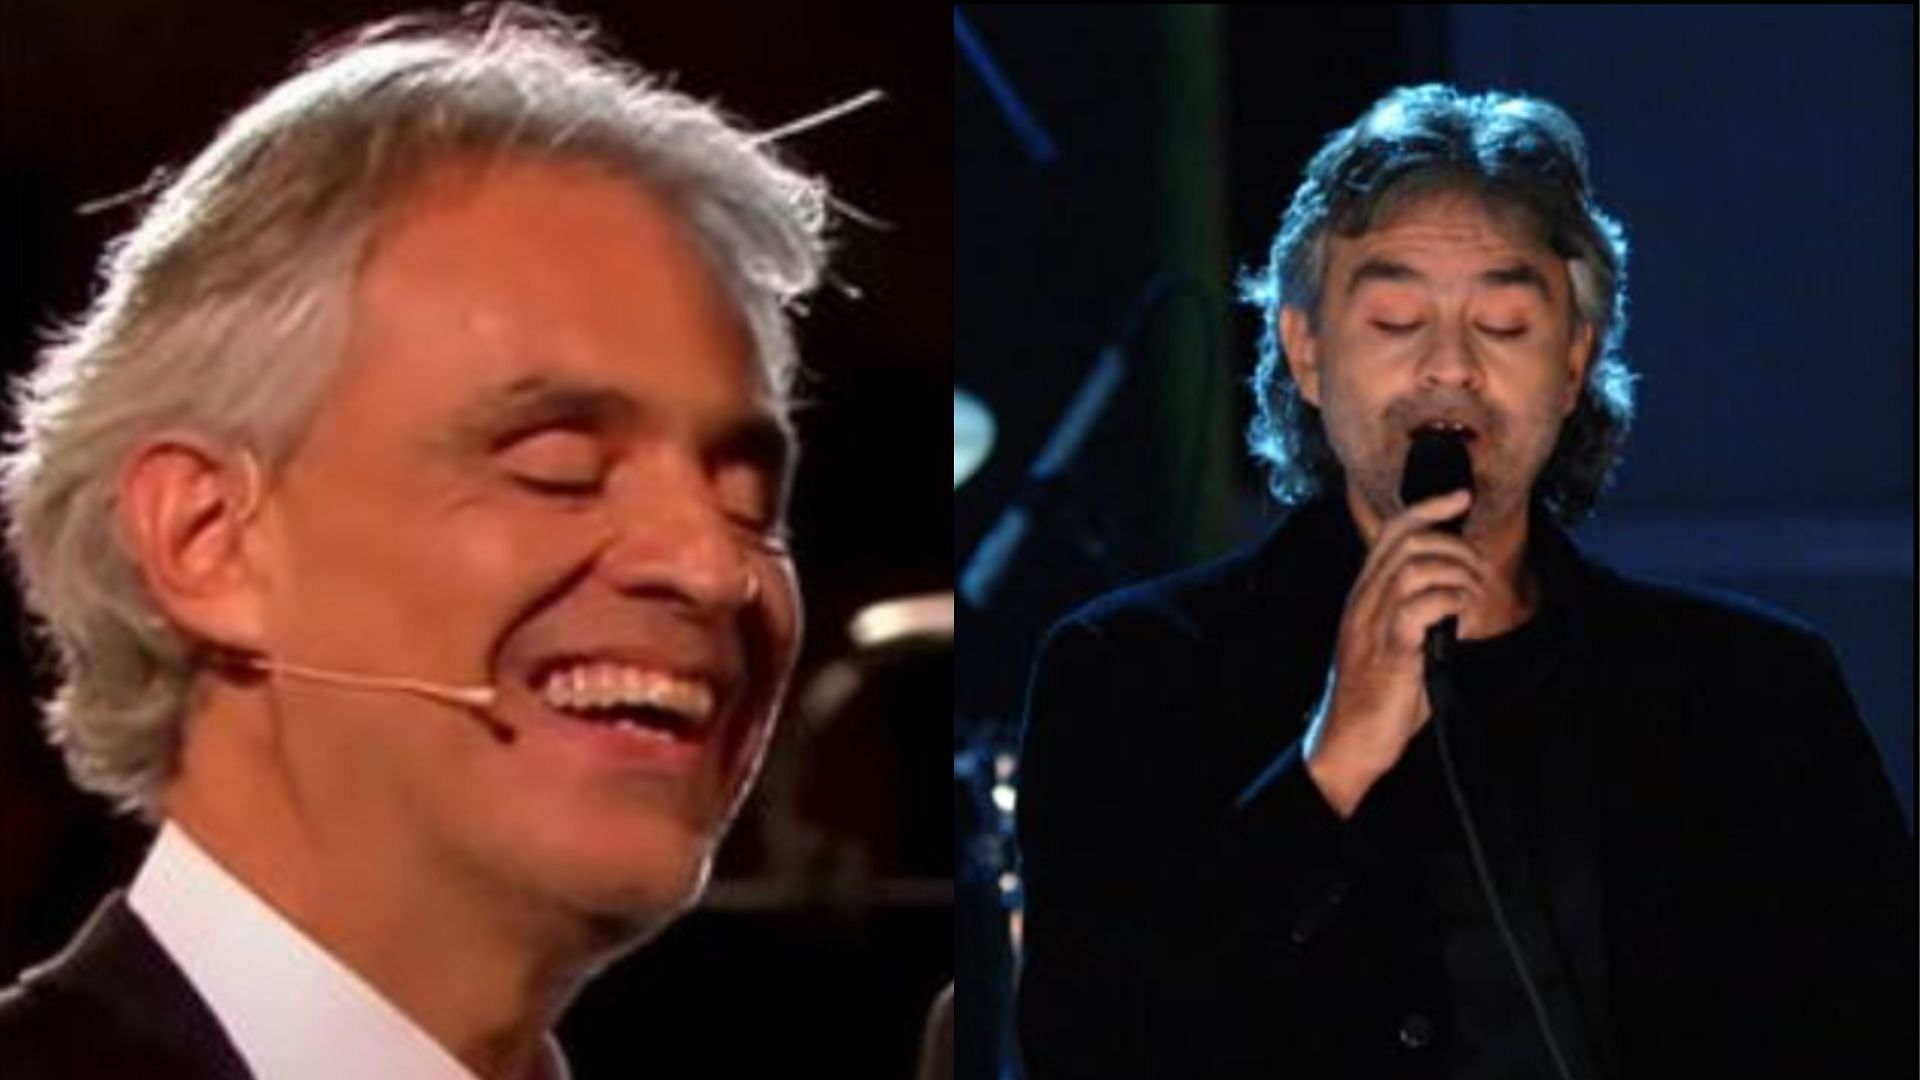 Andrea Bocelli is a visually impaired opera star (Image via X@mistertruth news and Stephen Lovekin@WireImage.com)